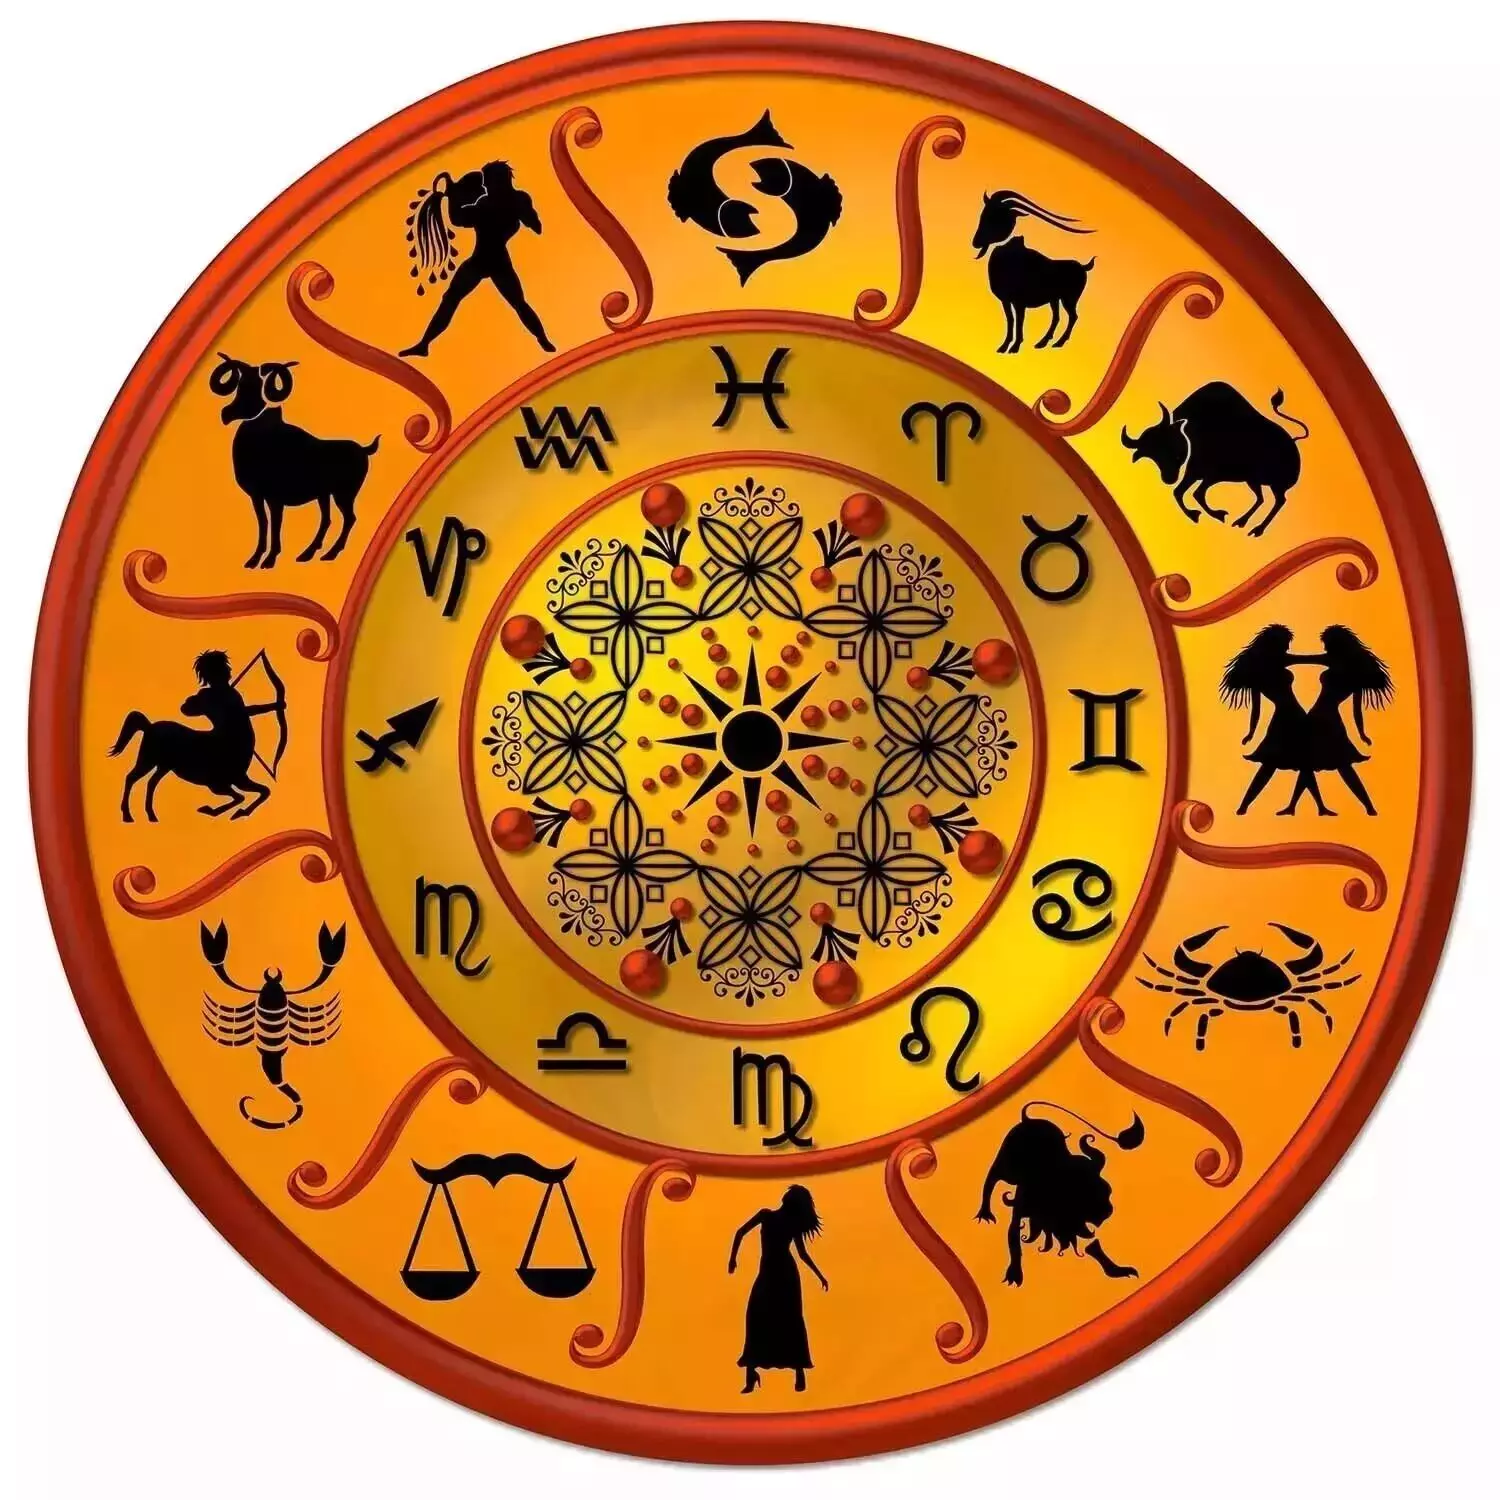 13 February – Know your todays horoscope